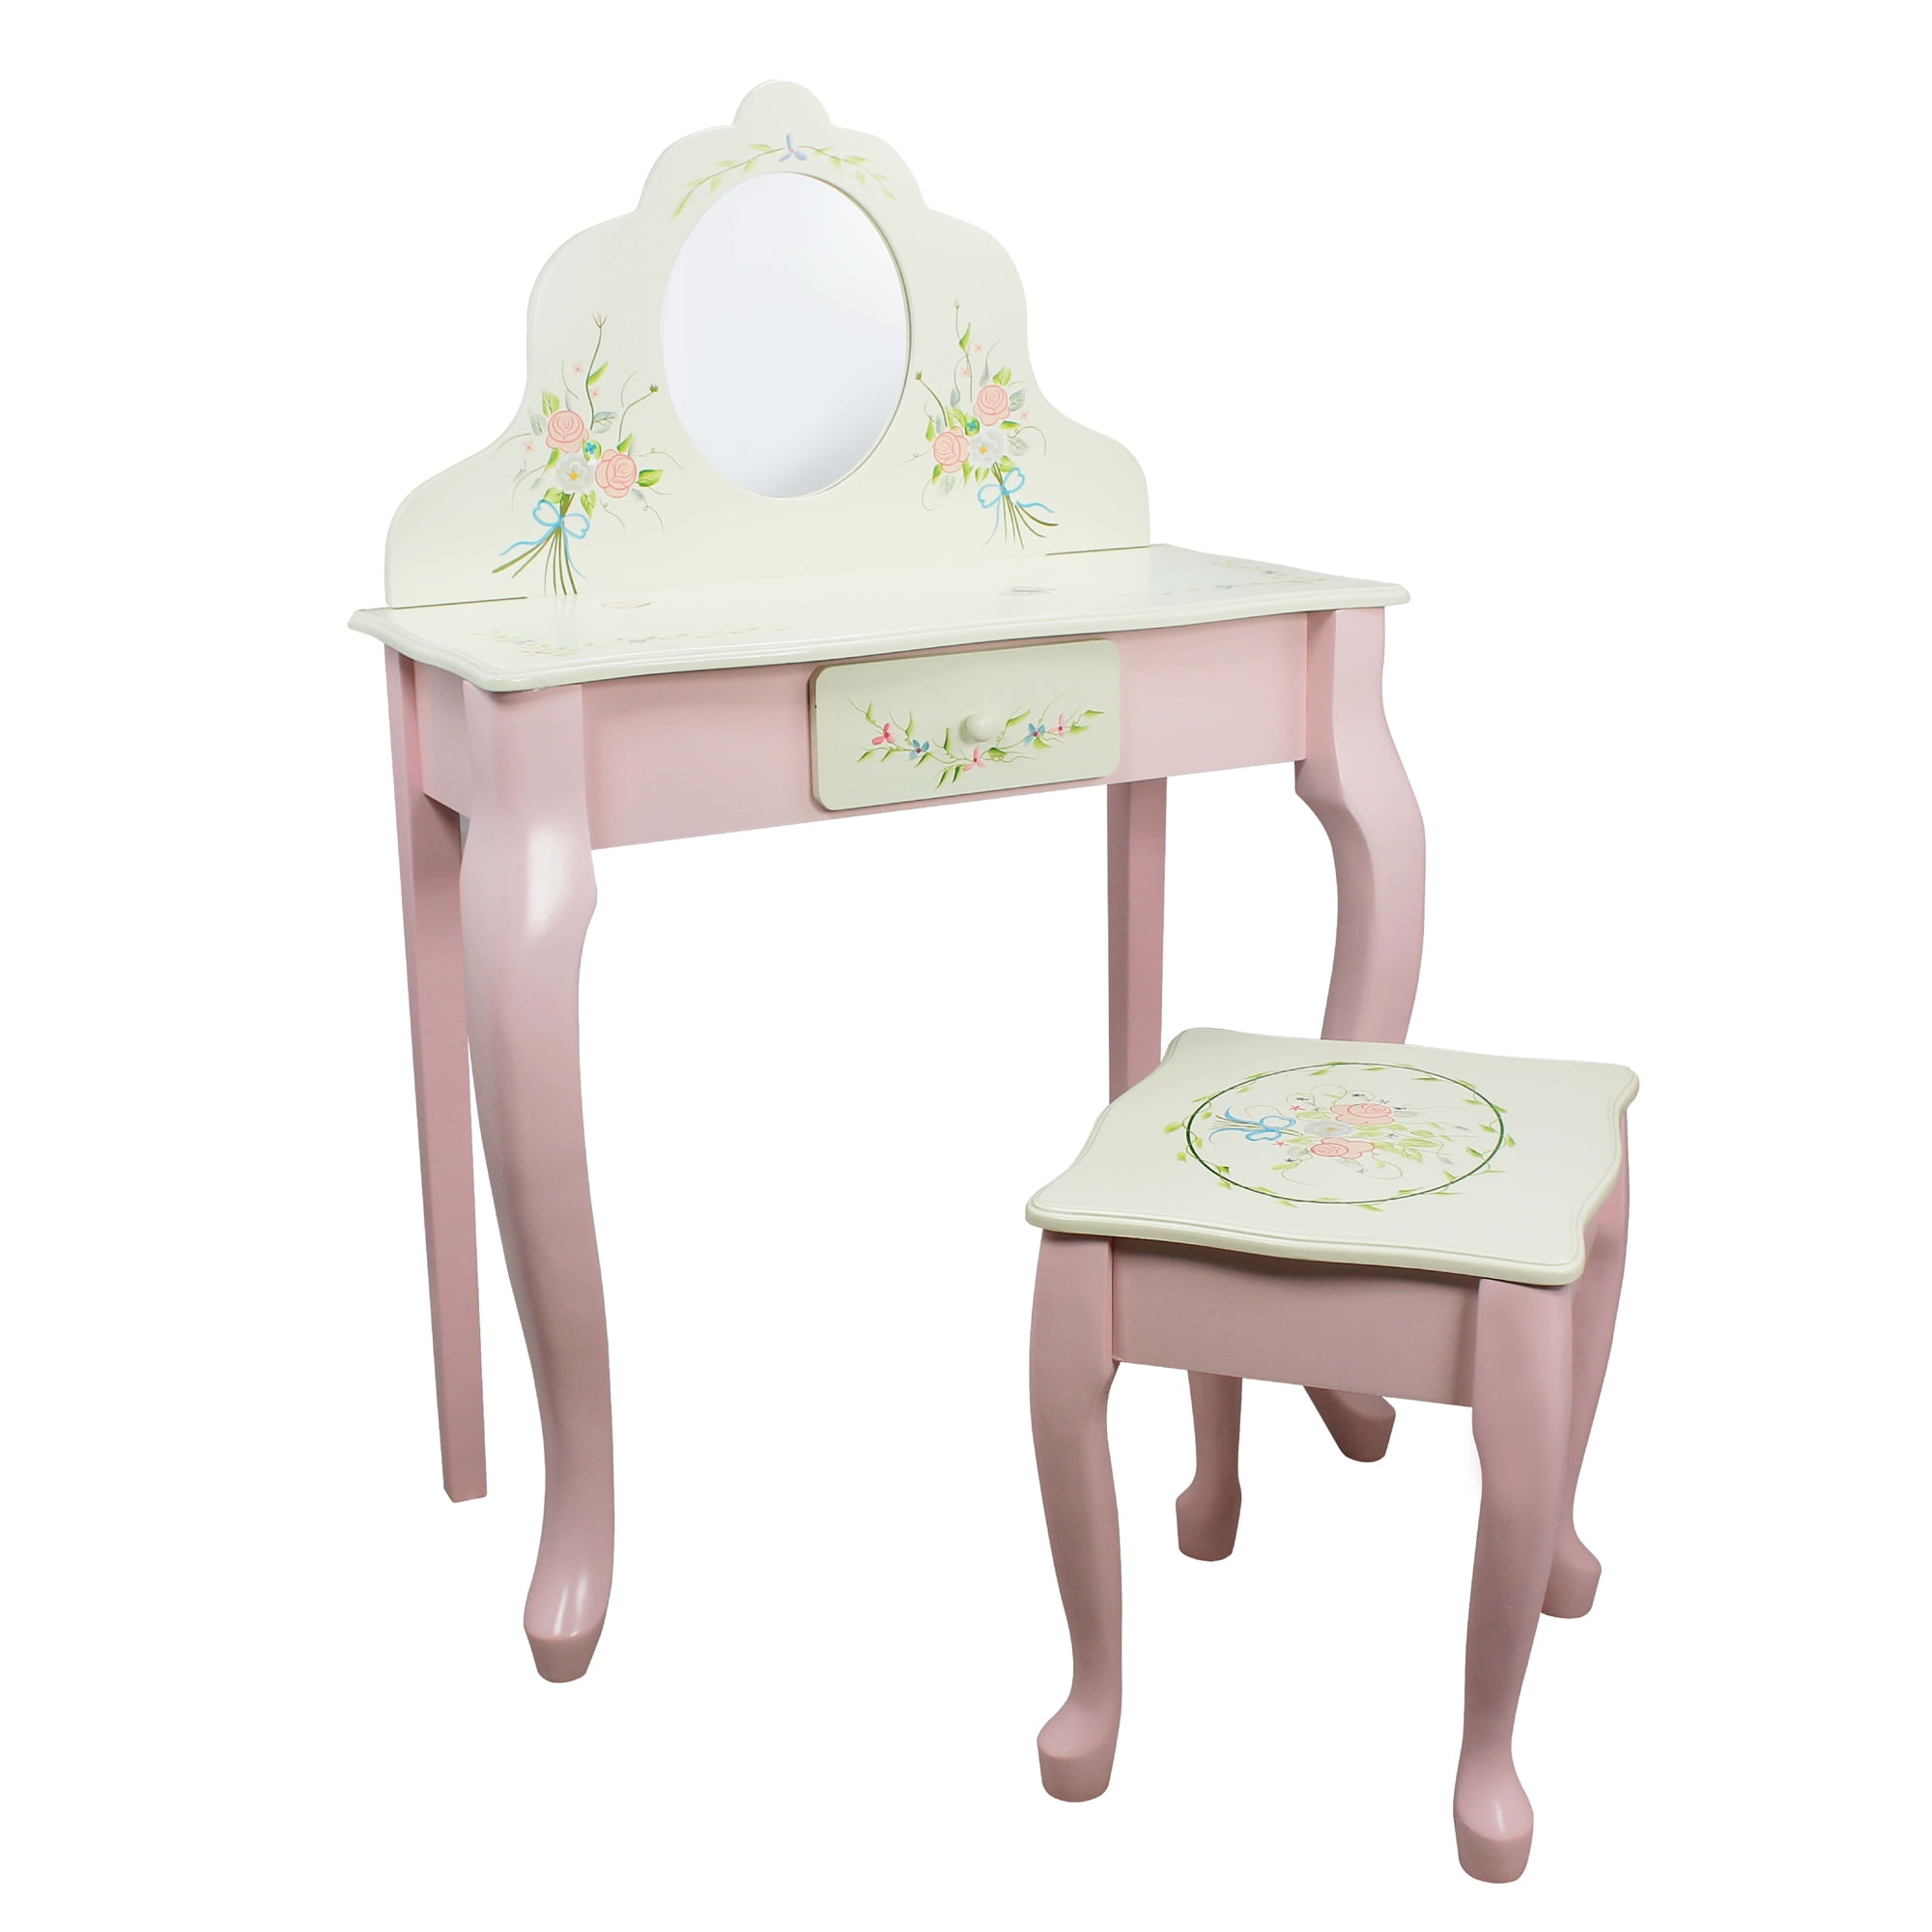 Fantasy Fields By Teamson Kids, Disney Princess Dressing Table And Chair Set